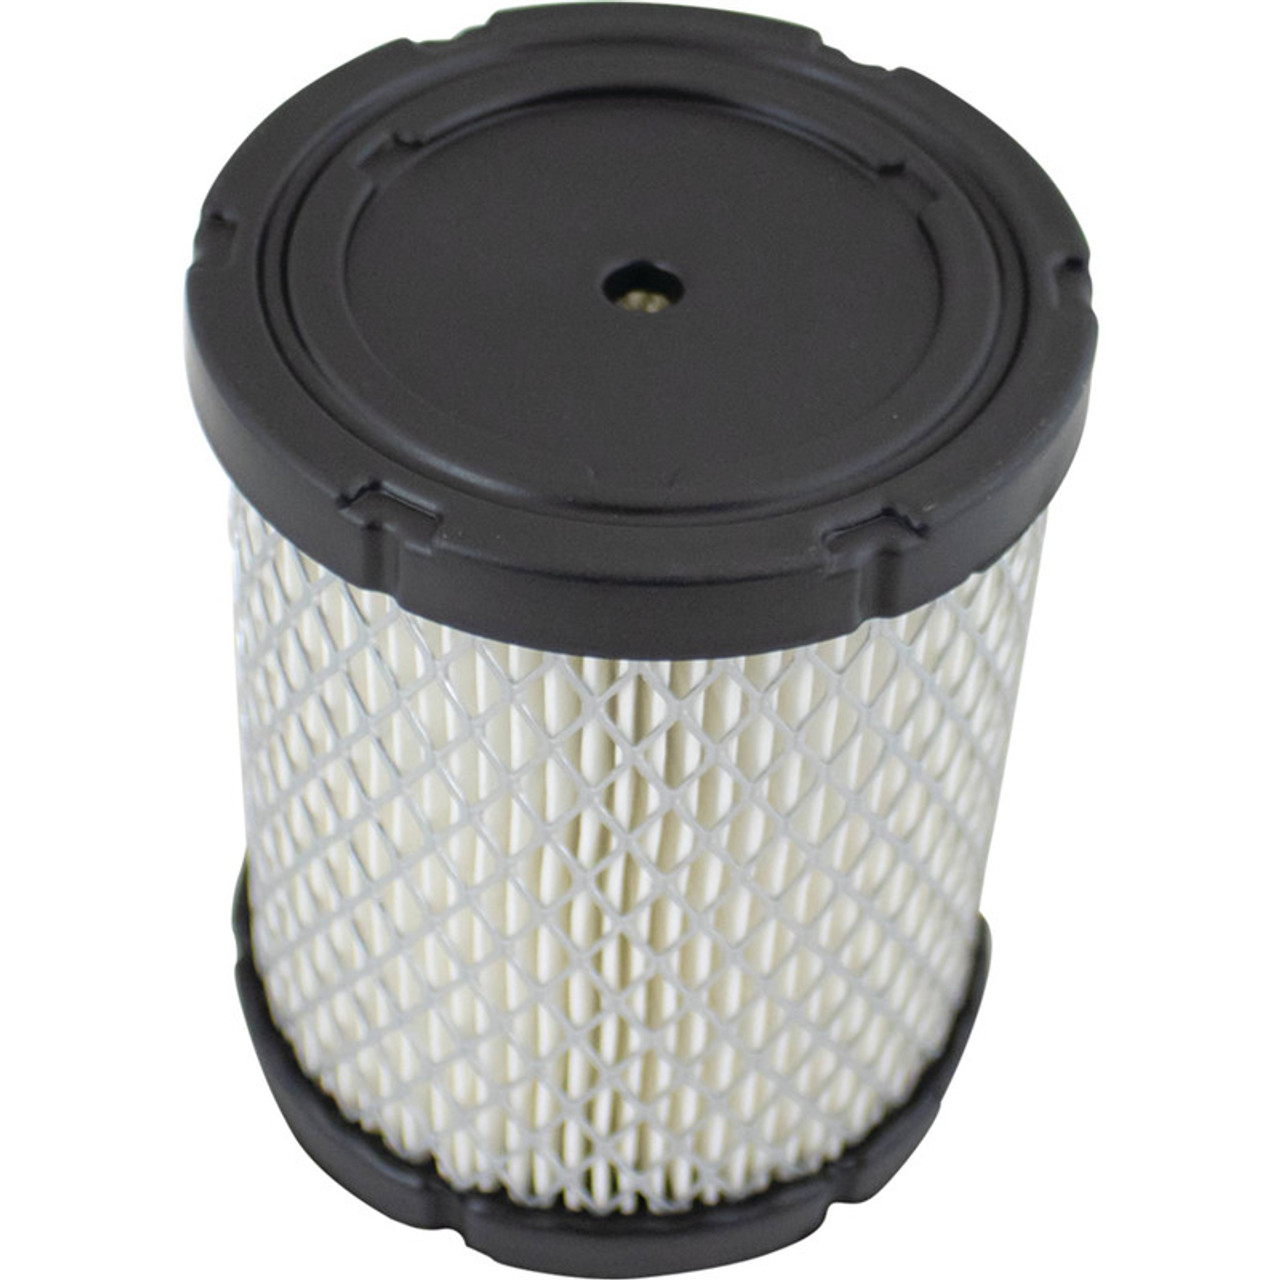 Stens 100-915 Air Filter - (Replaces Onan 140-3280)